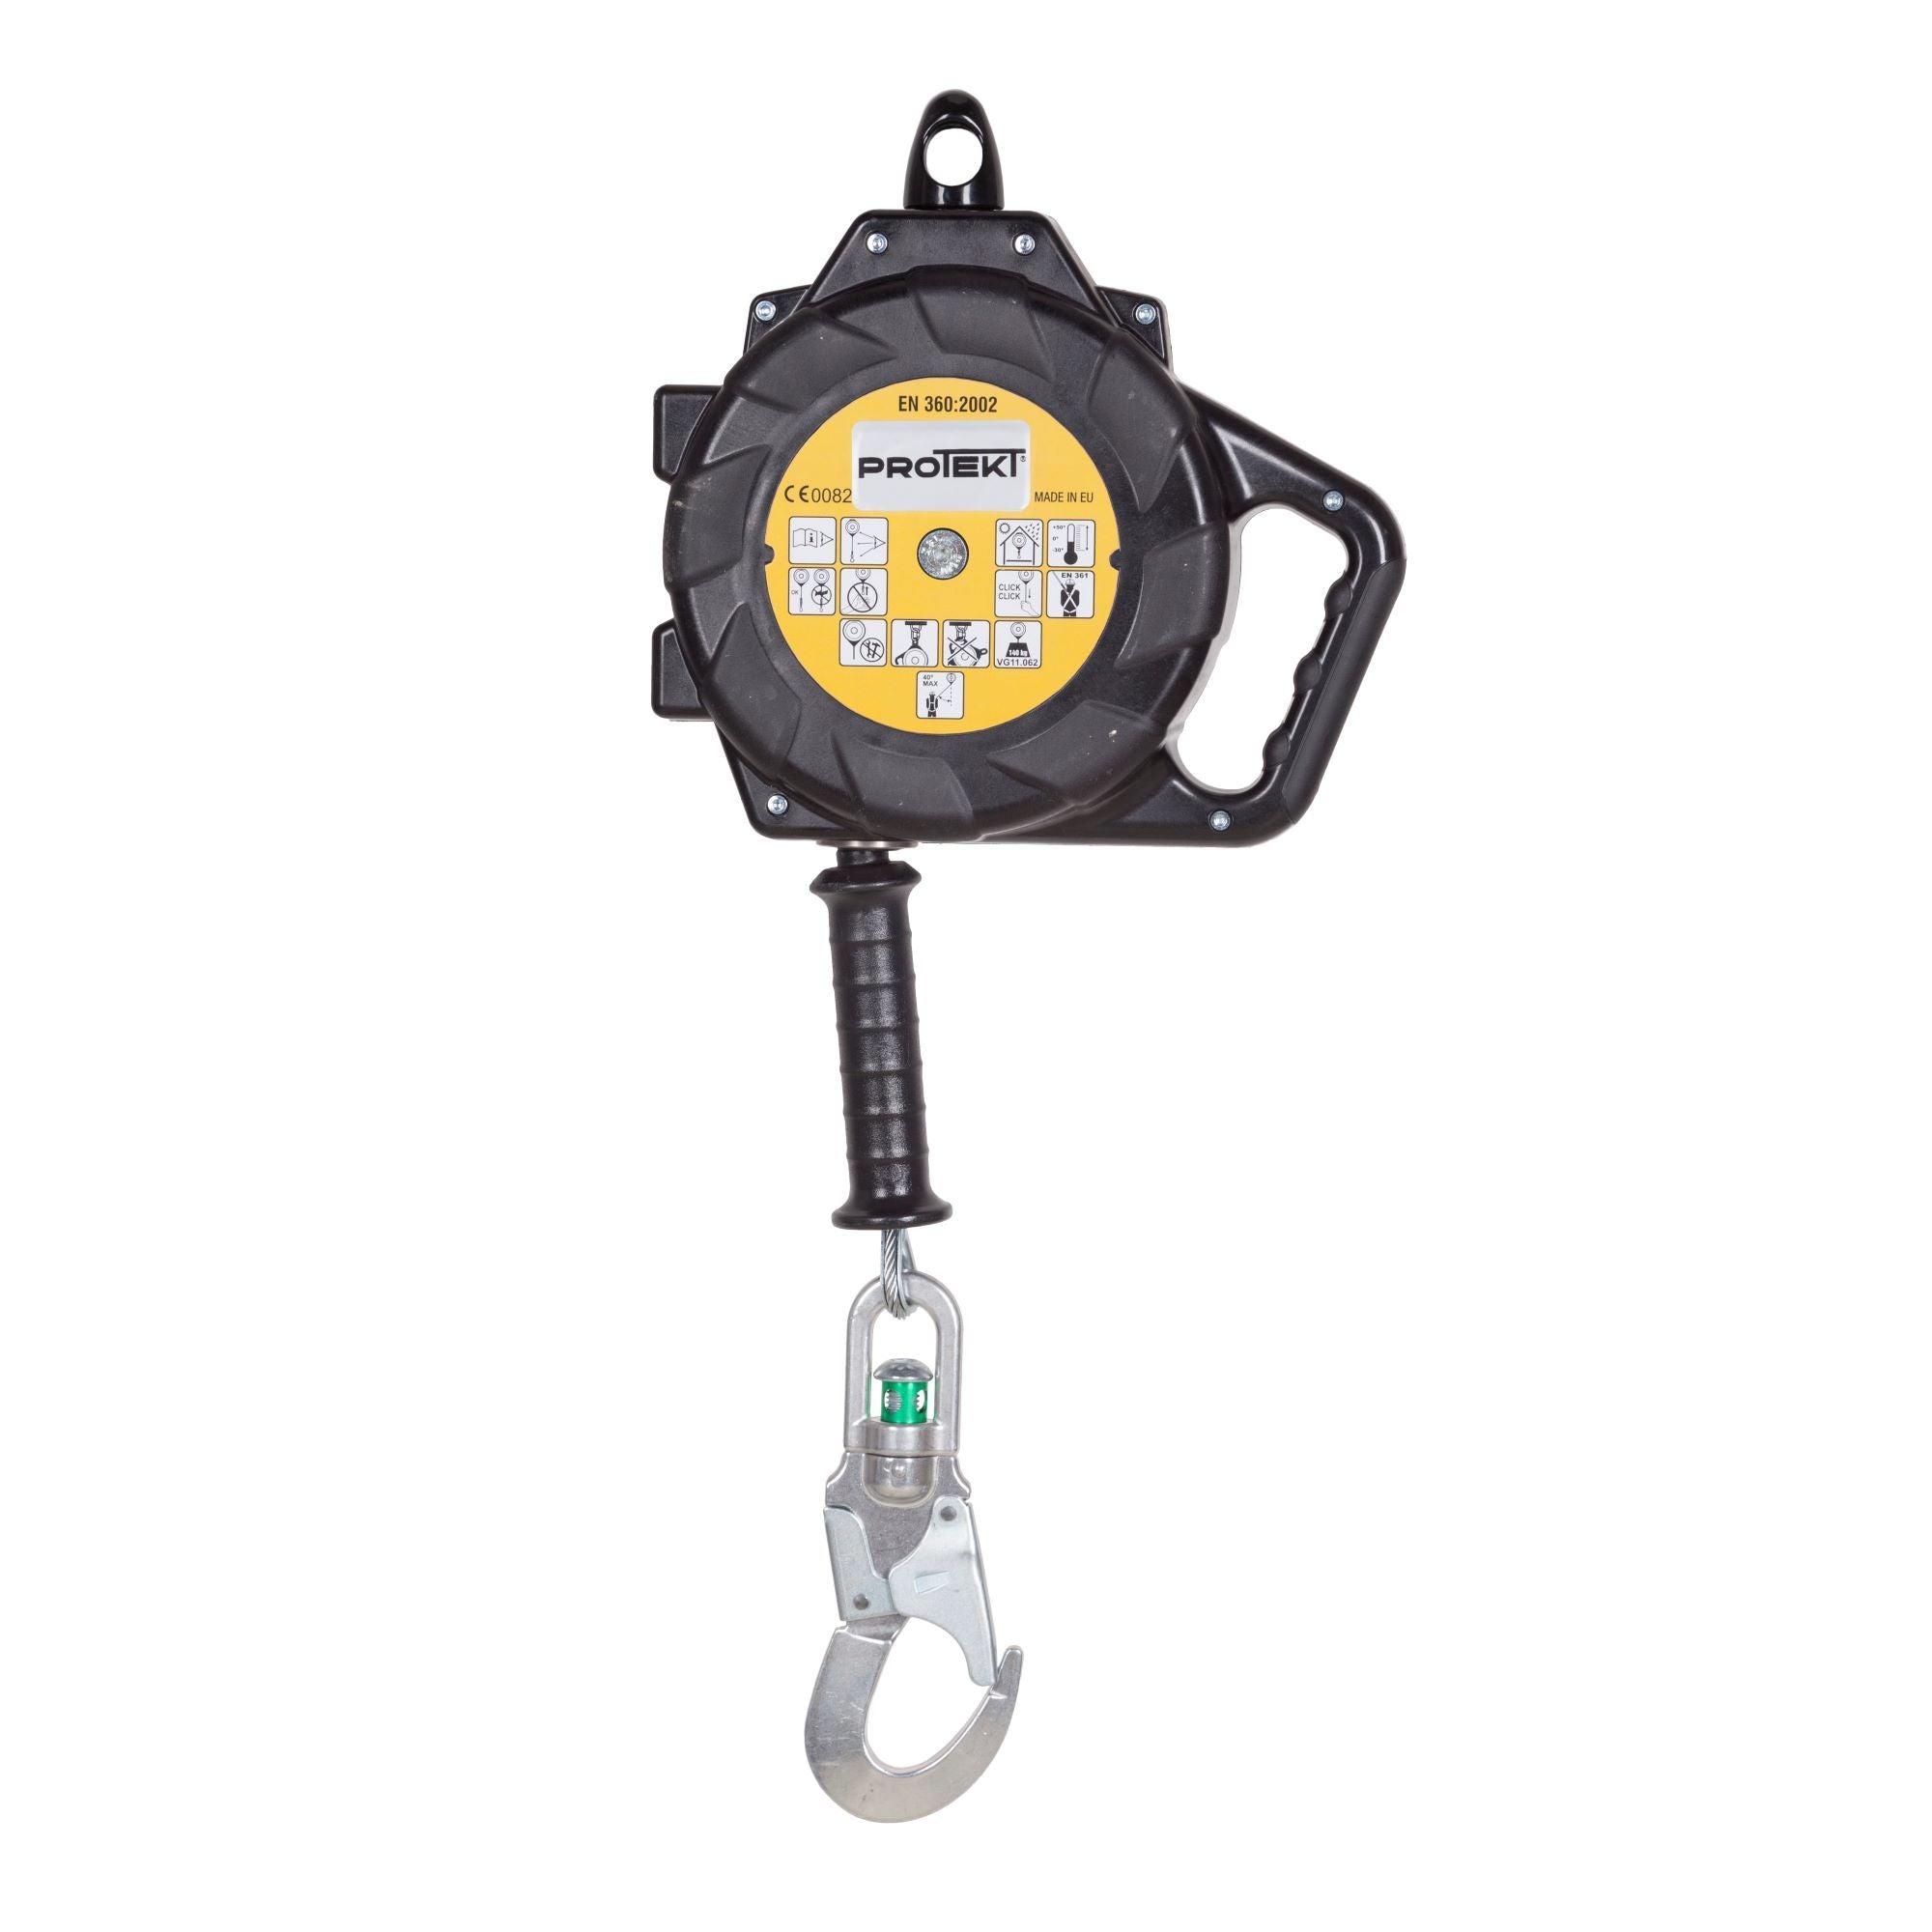 P35 Full Body Safety Harness (2 attachment points) - Steel Chest Strap